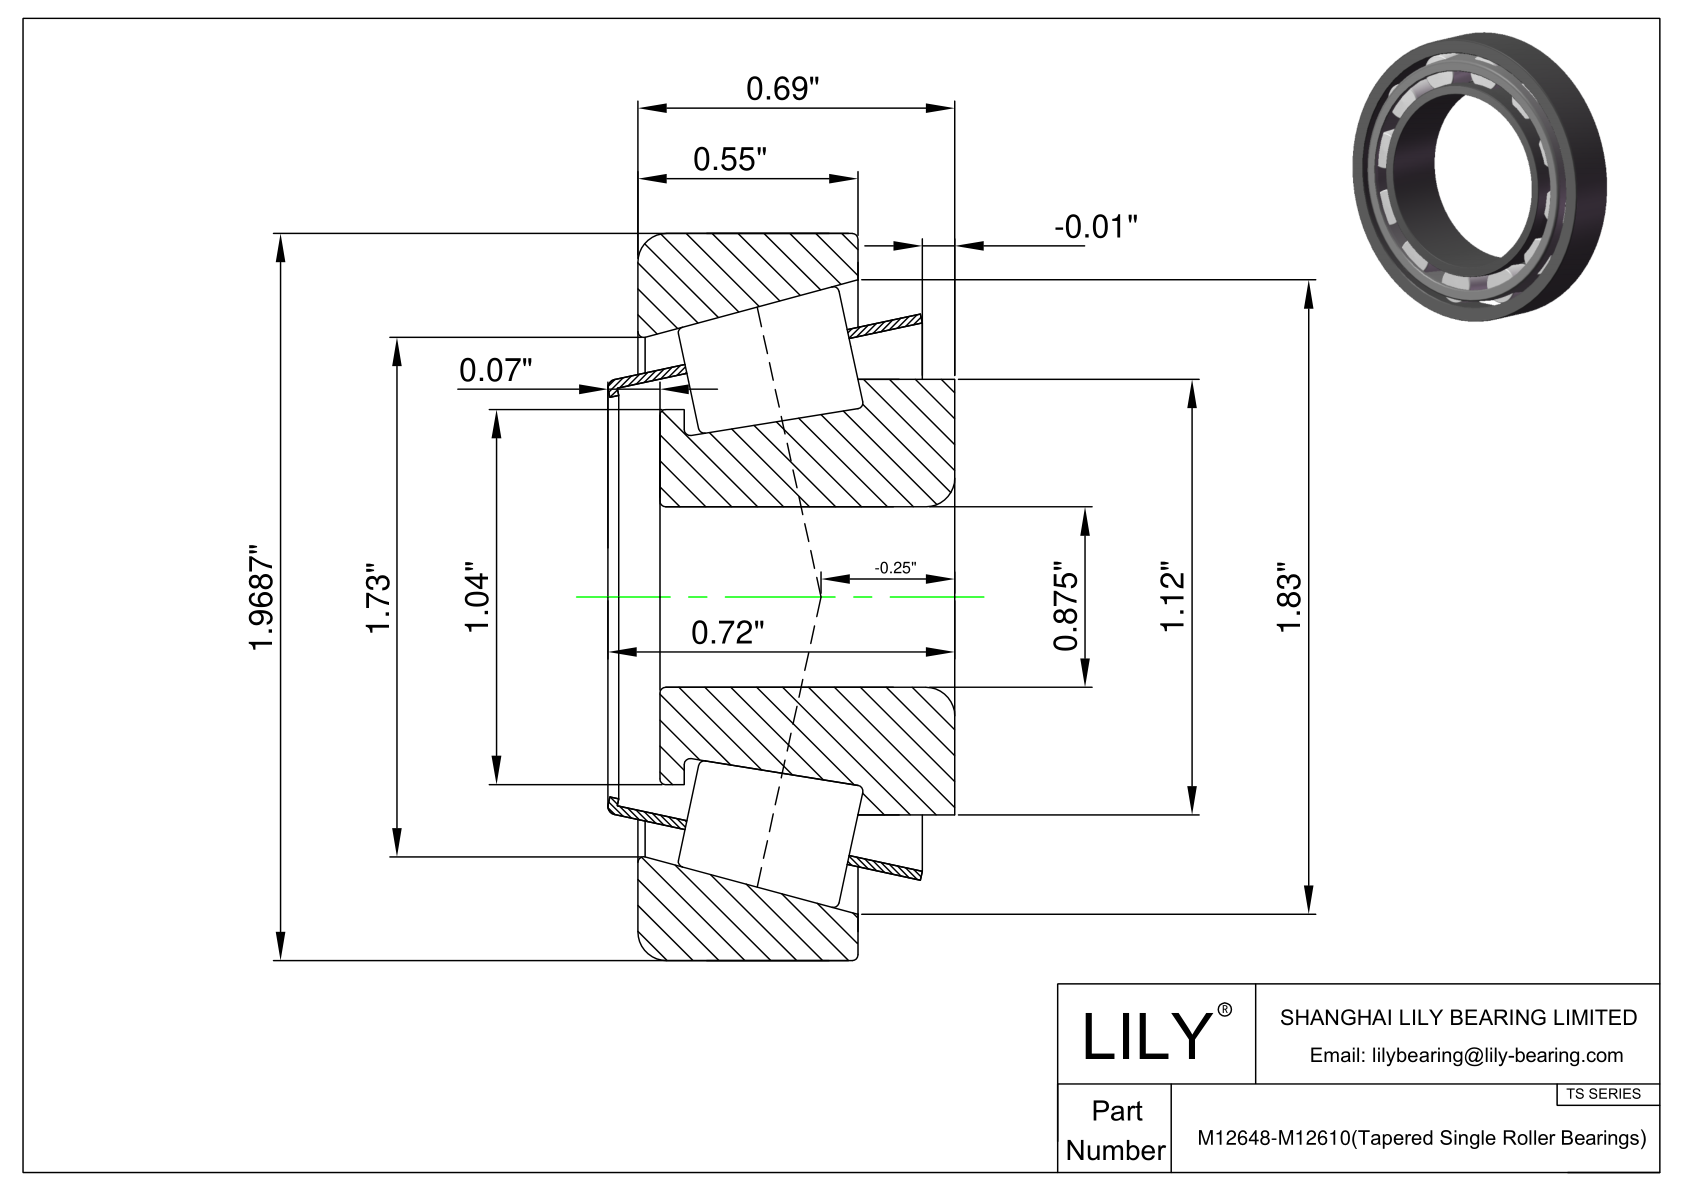 M12648-M12610 TS (Tapered Single Roller Bearings) (Imperial) cad drawing